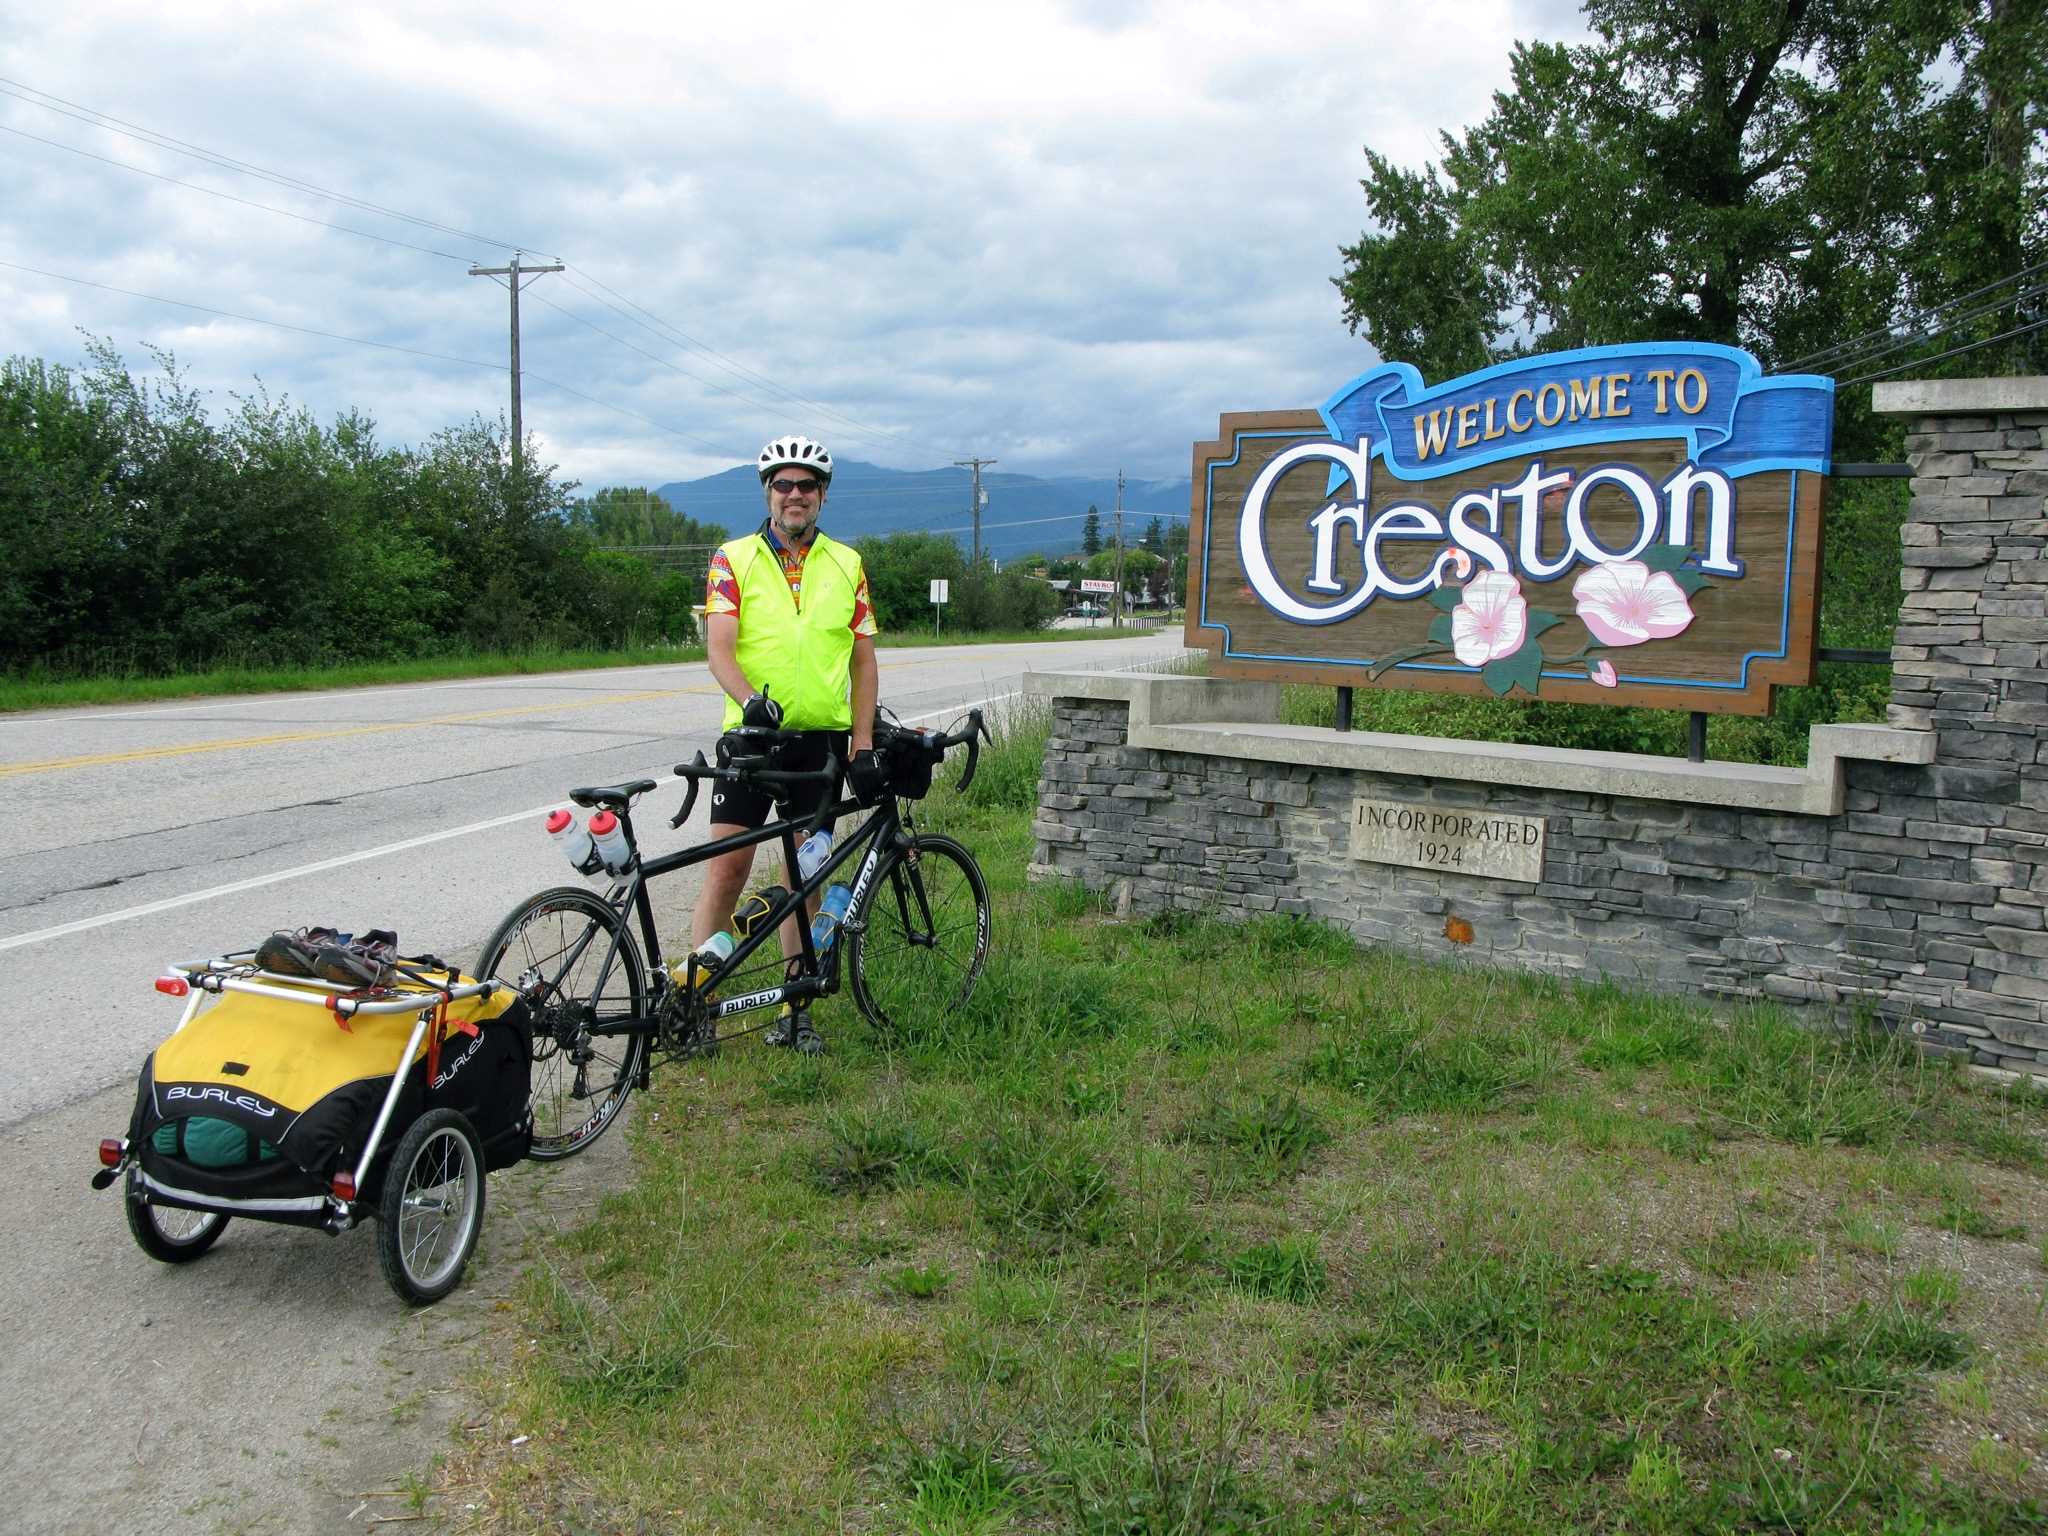 A bike rider taking a break with his gear in front of a town sign.